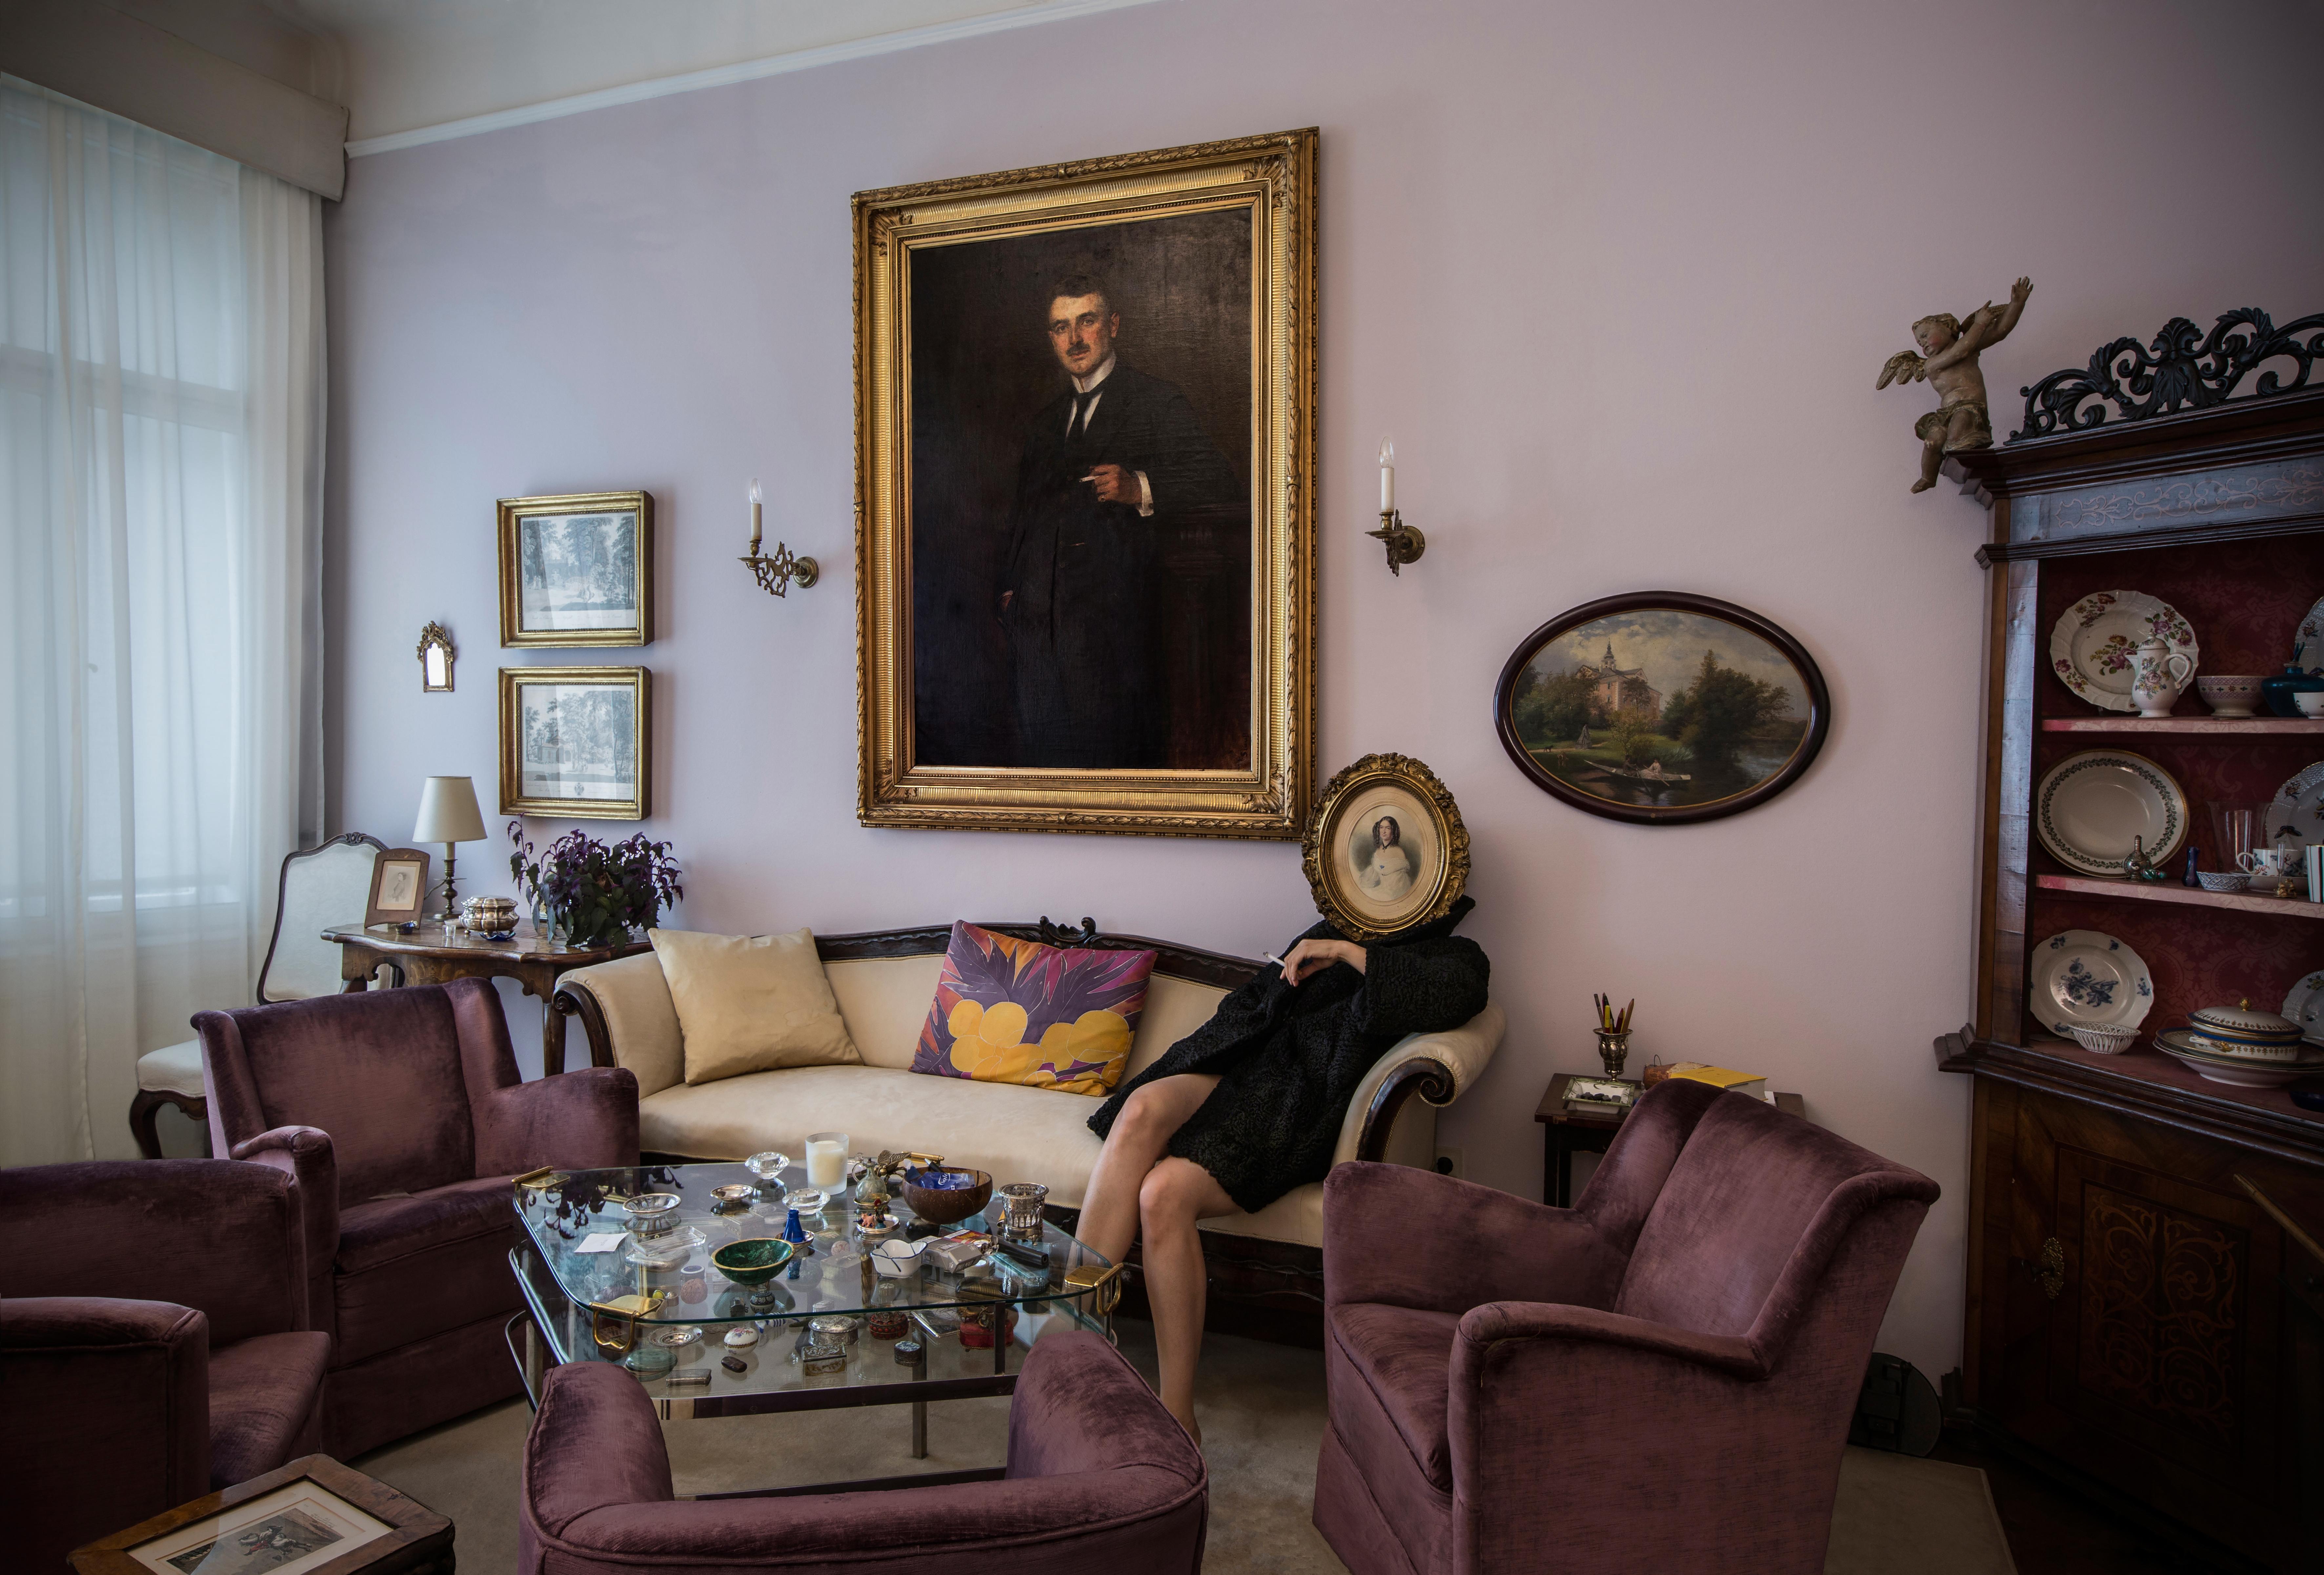 Catharina BOND Portrait Photograph - Rooms of Requirement (Purple) - 21st Century Color Contemporary Photography